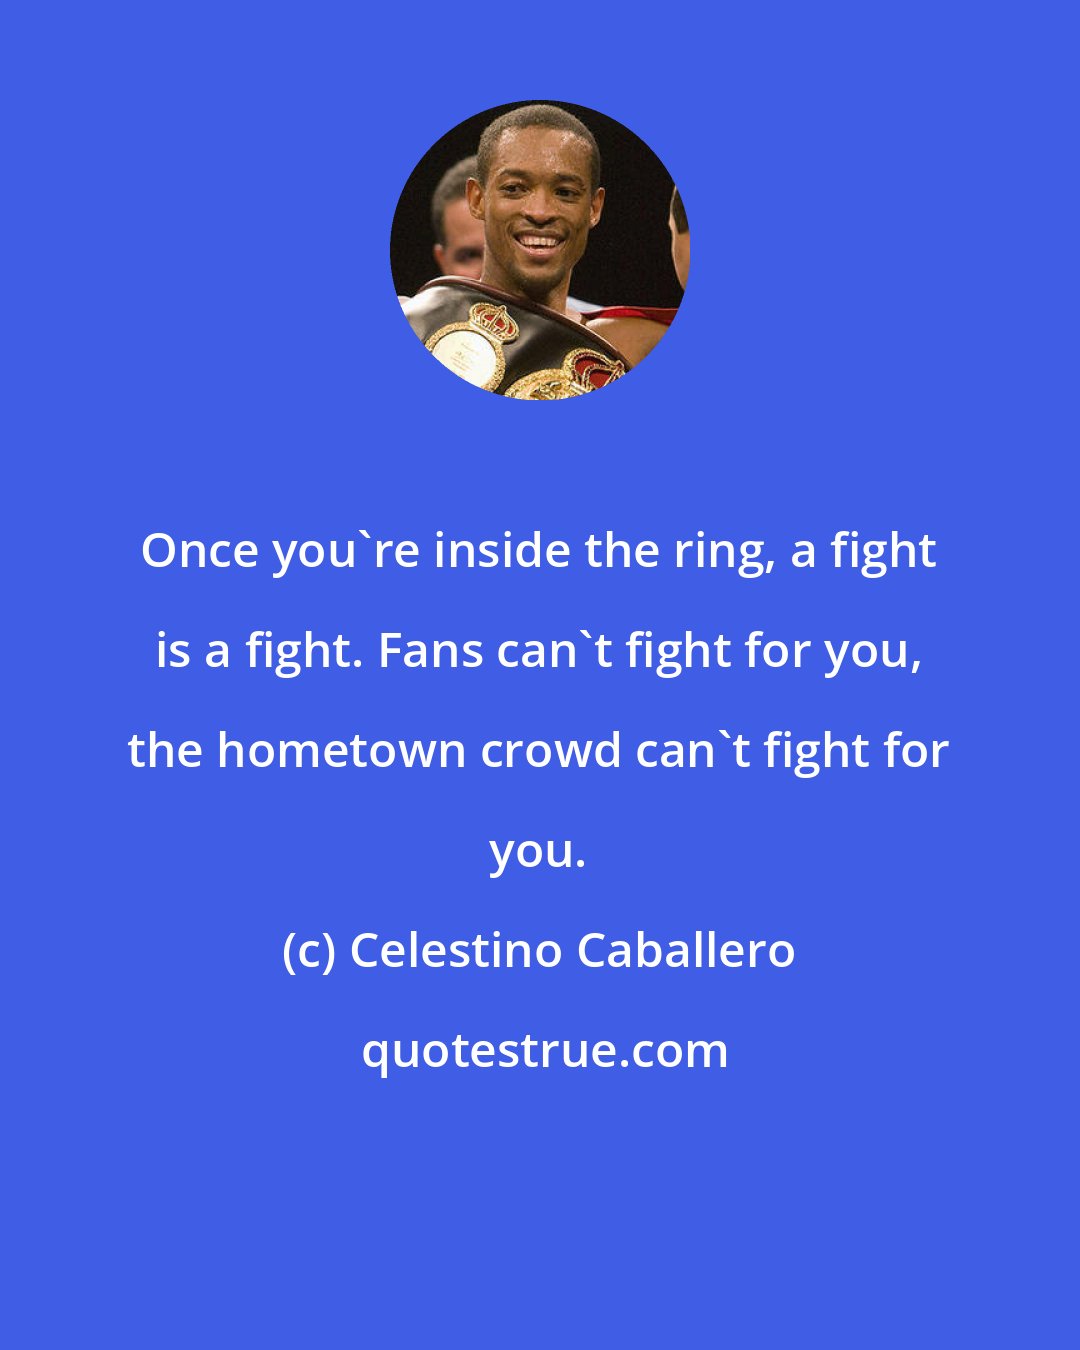 Celestino Caballero: Once you're inside the ring, a fight is a fight. Fans can't fight for you, the hometown crowd can't fight for you.